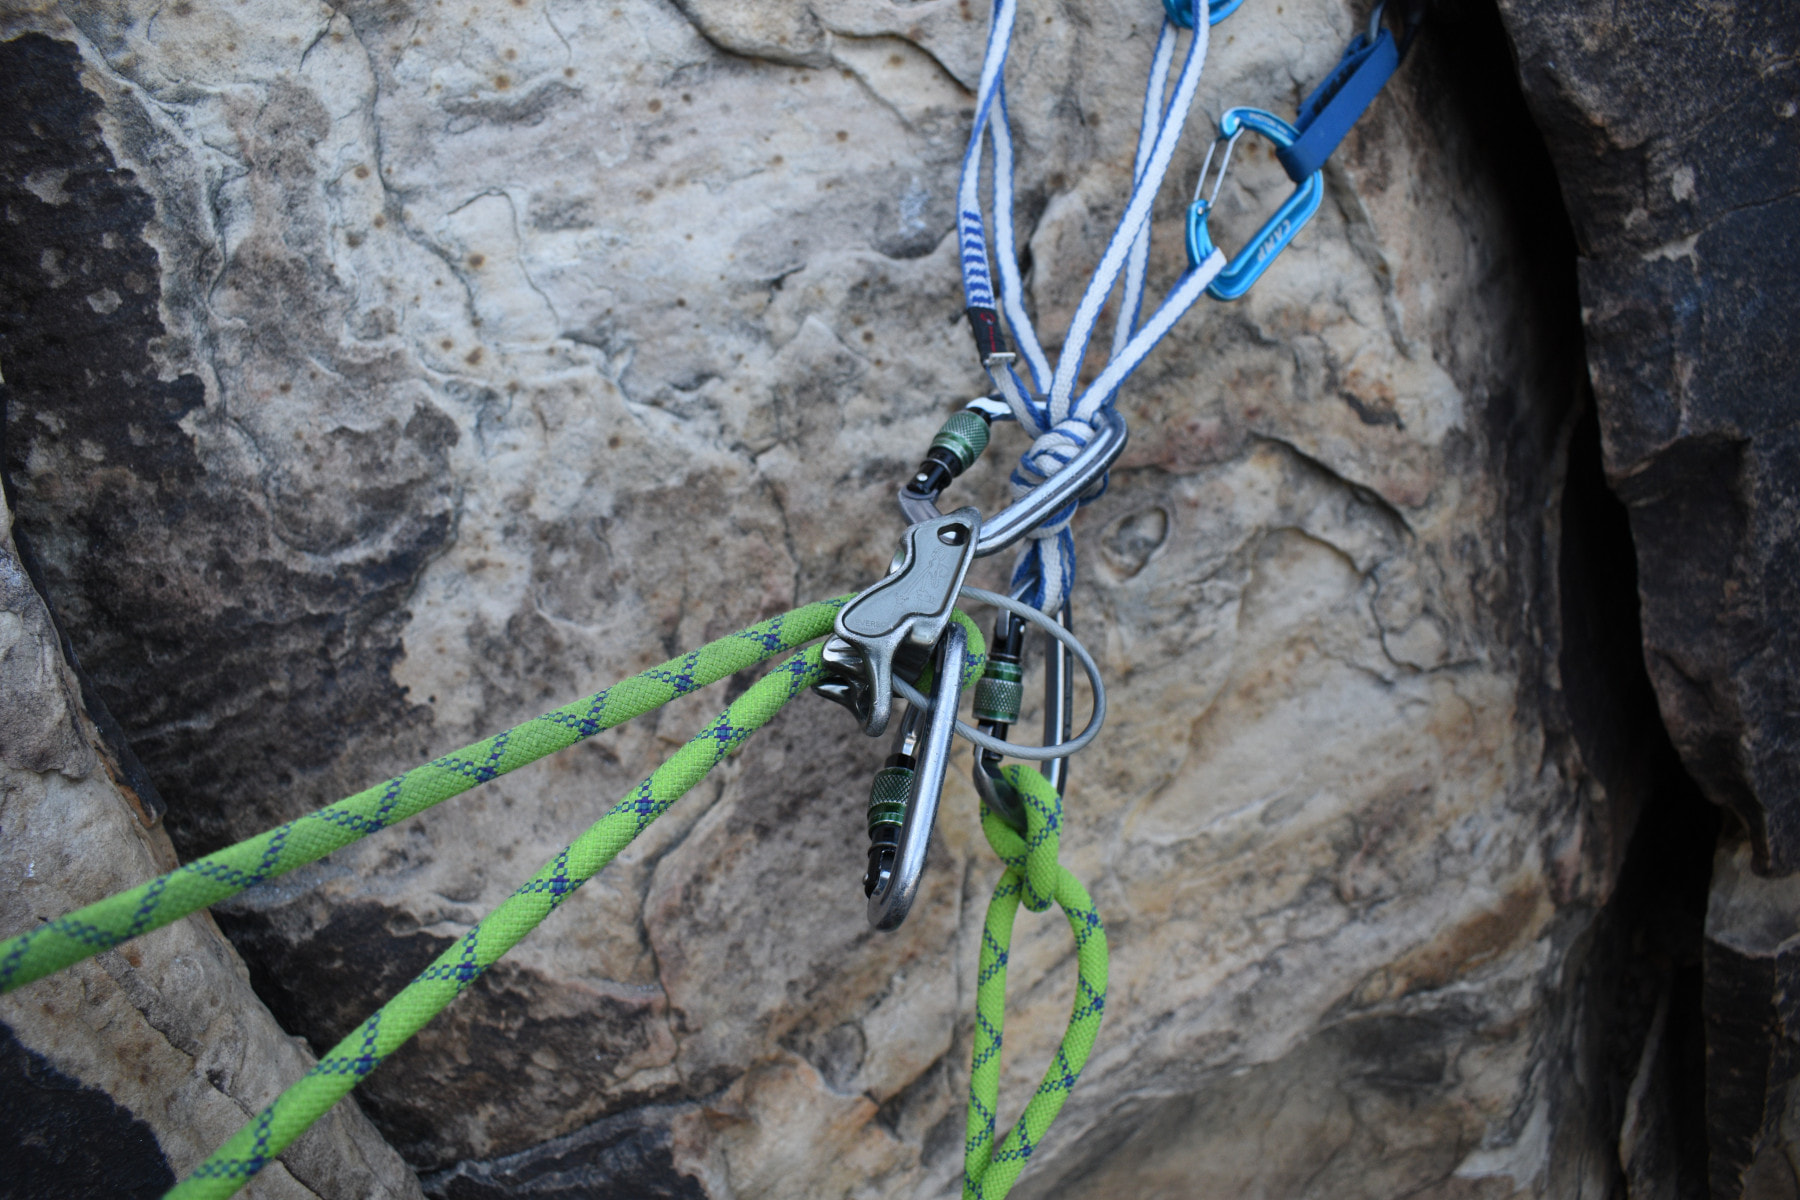 Belaying from above